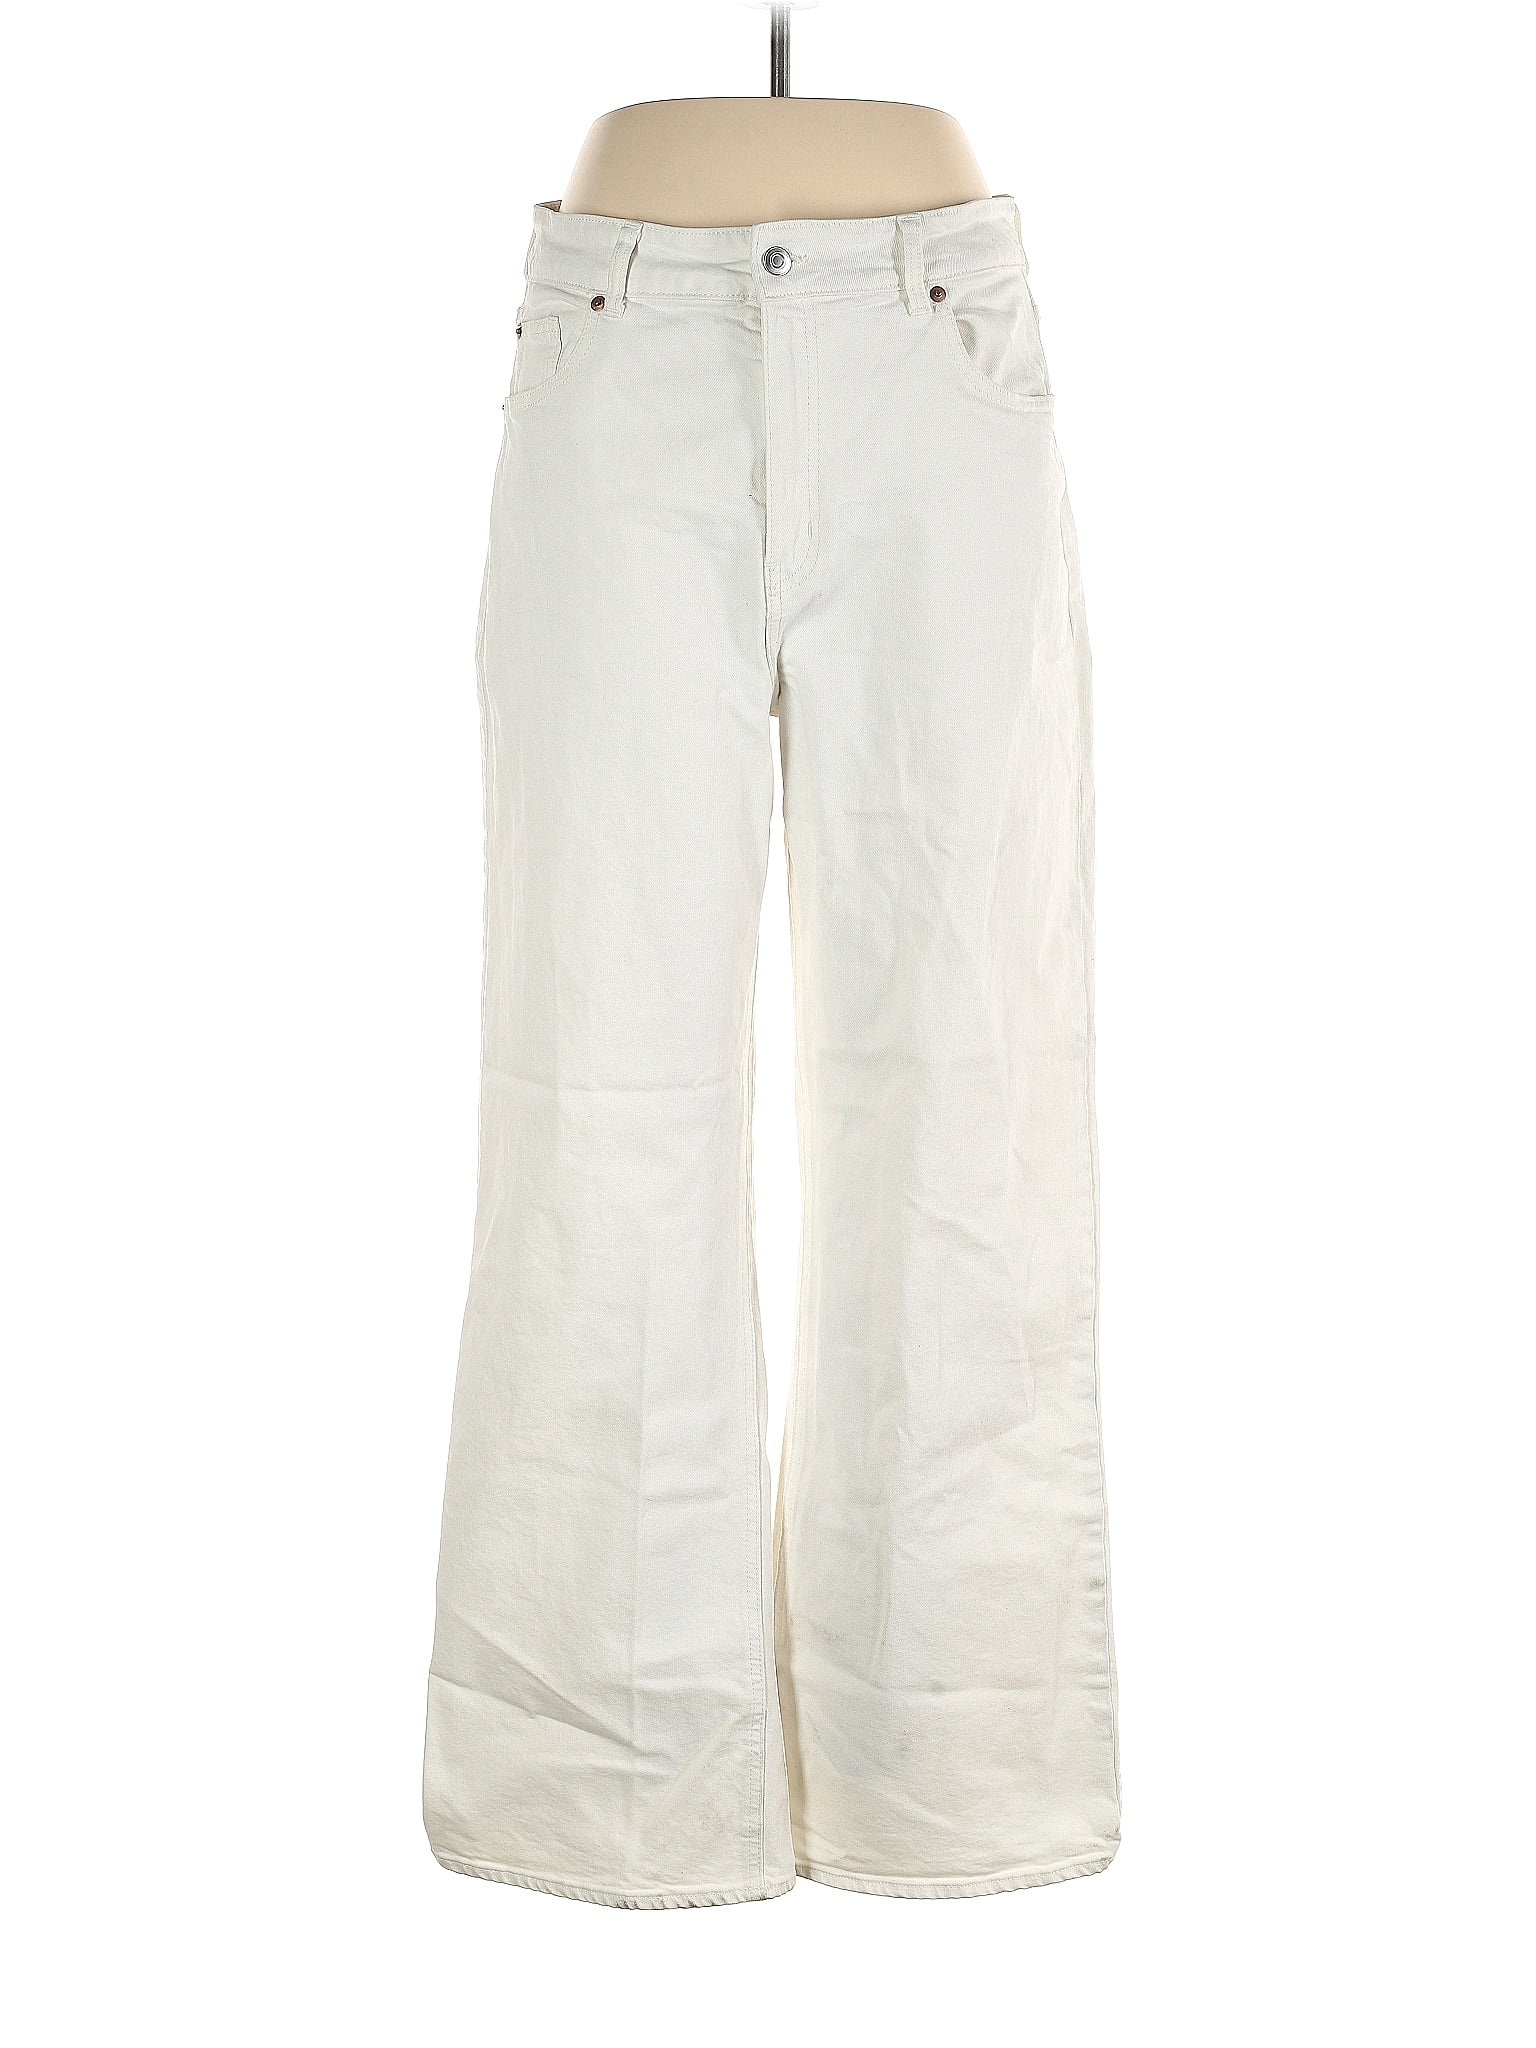 H&M Solid Ivory Jeans Size 14 - 44% off | ThredUp